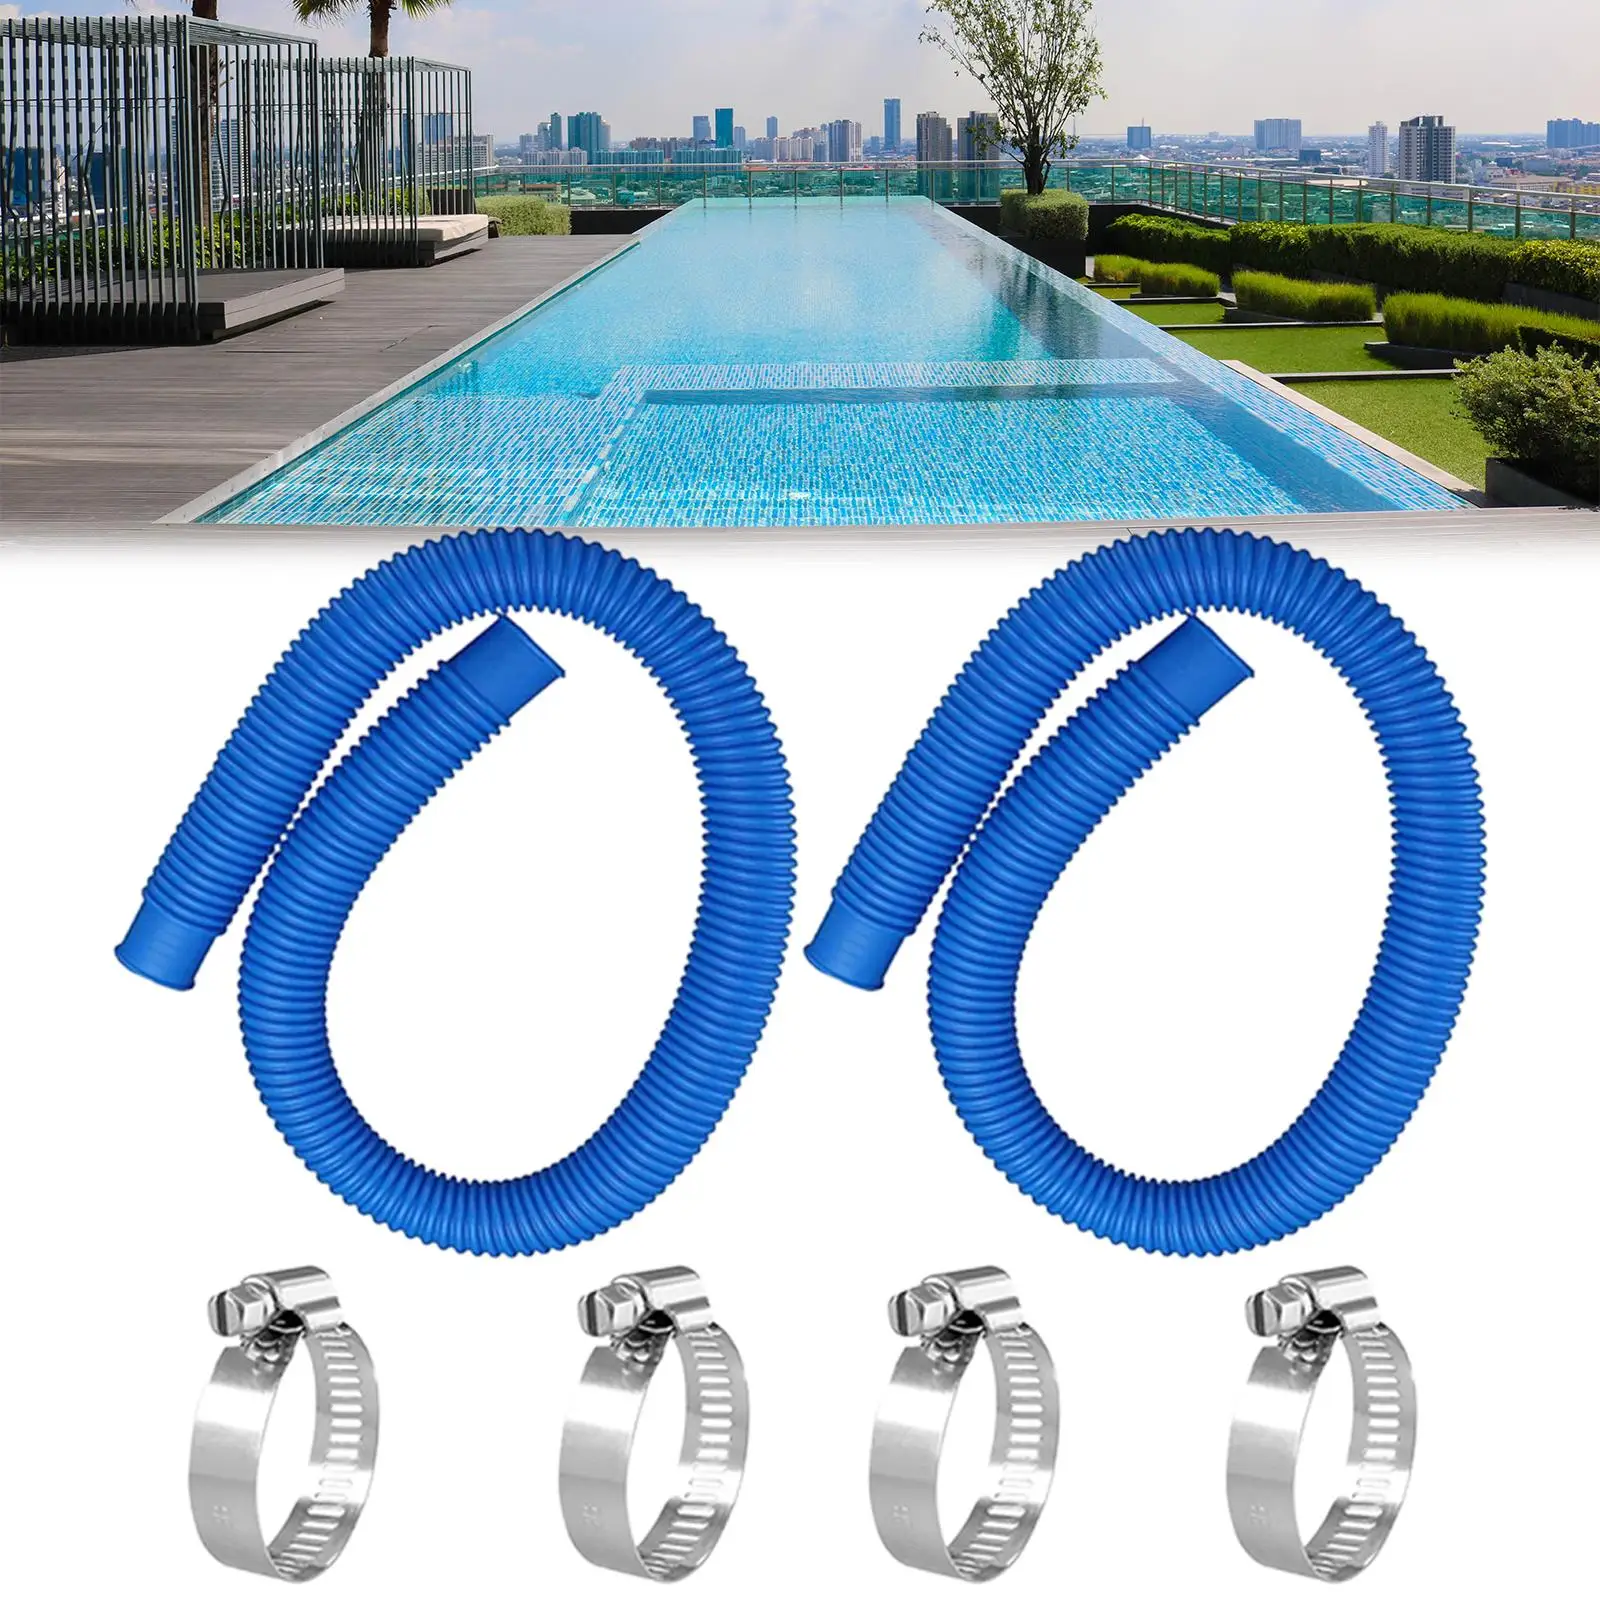 2 Pieces Replacement Hose ground Leakproof Flexible Durable for 1,000 GPH